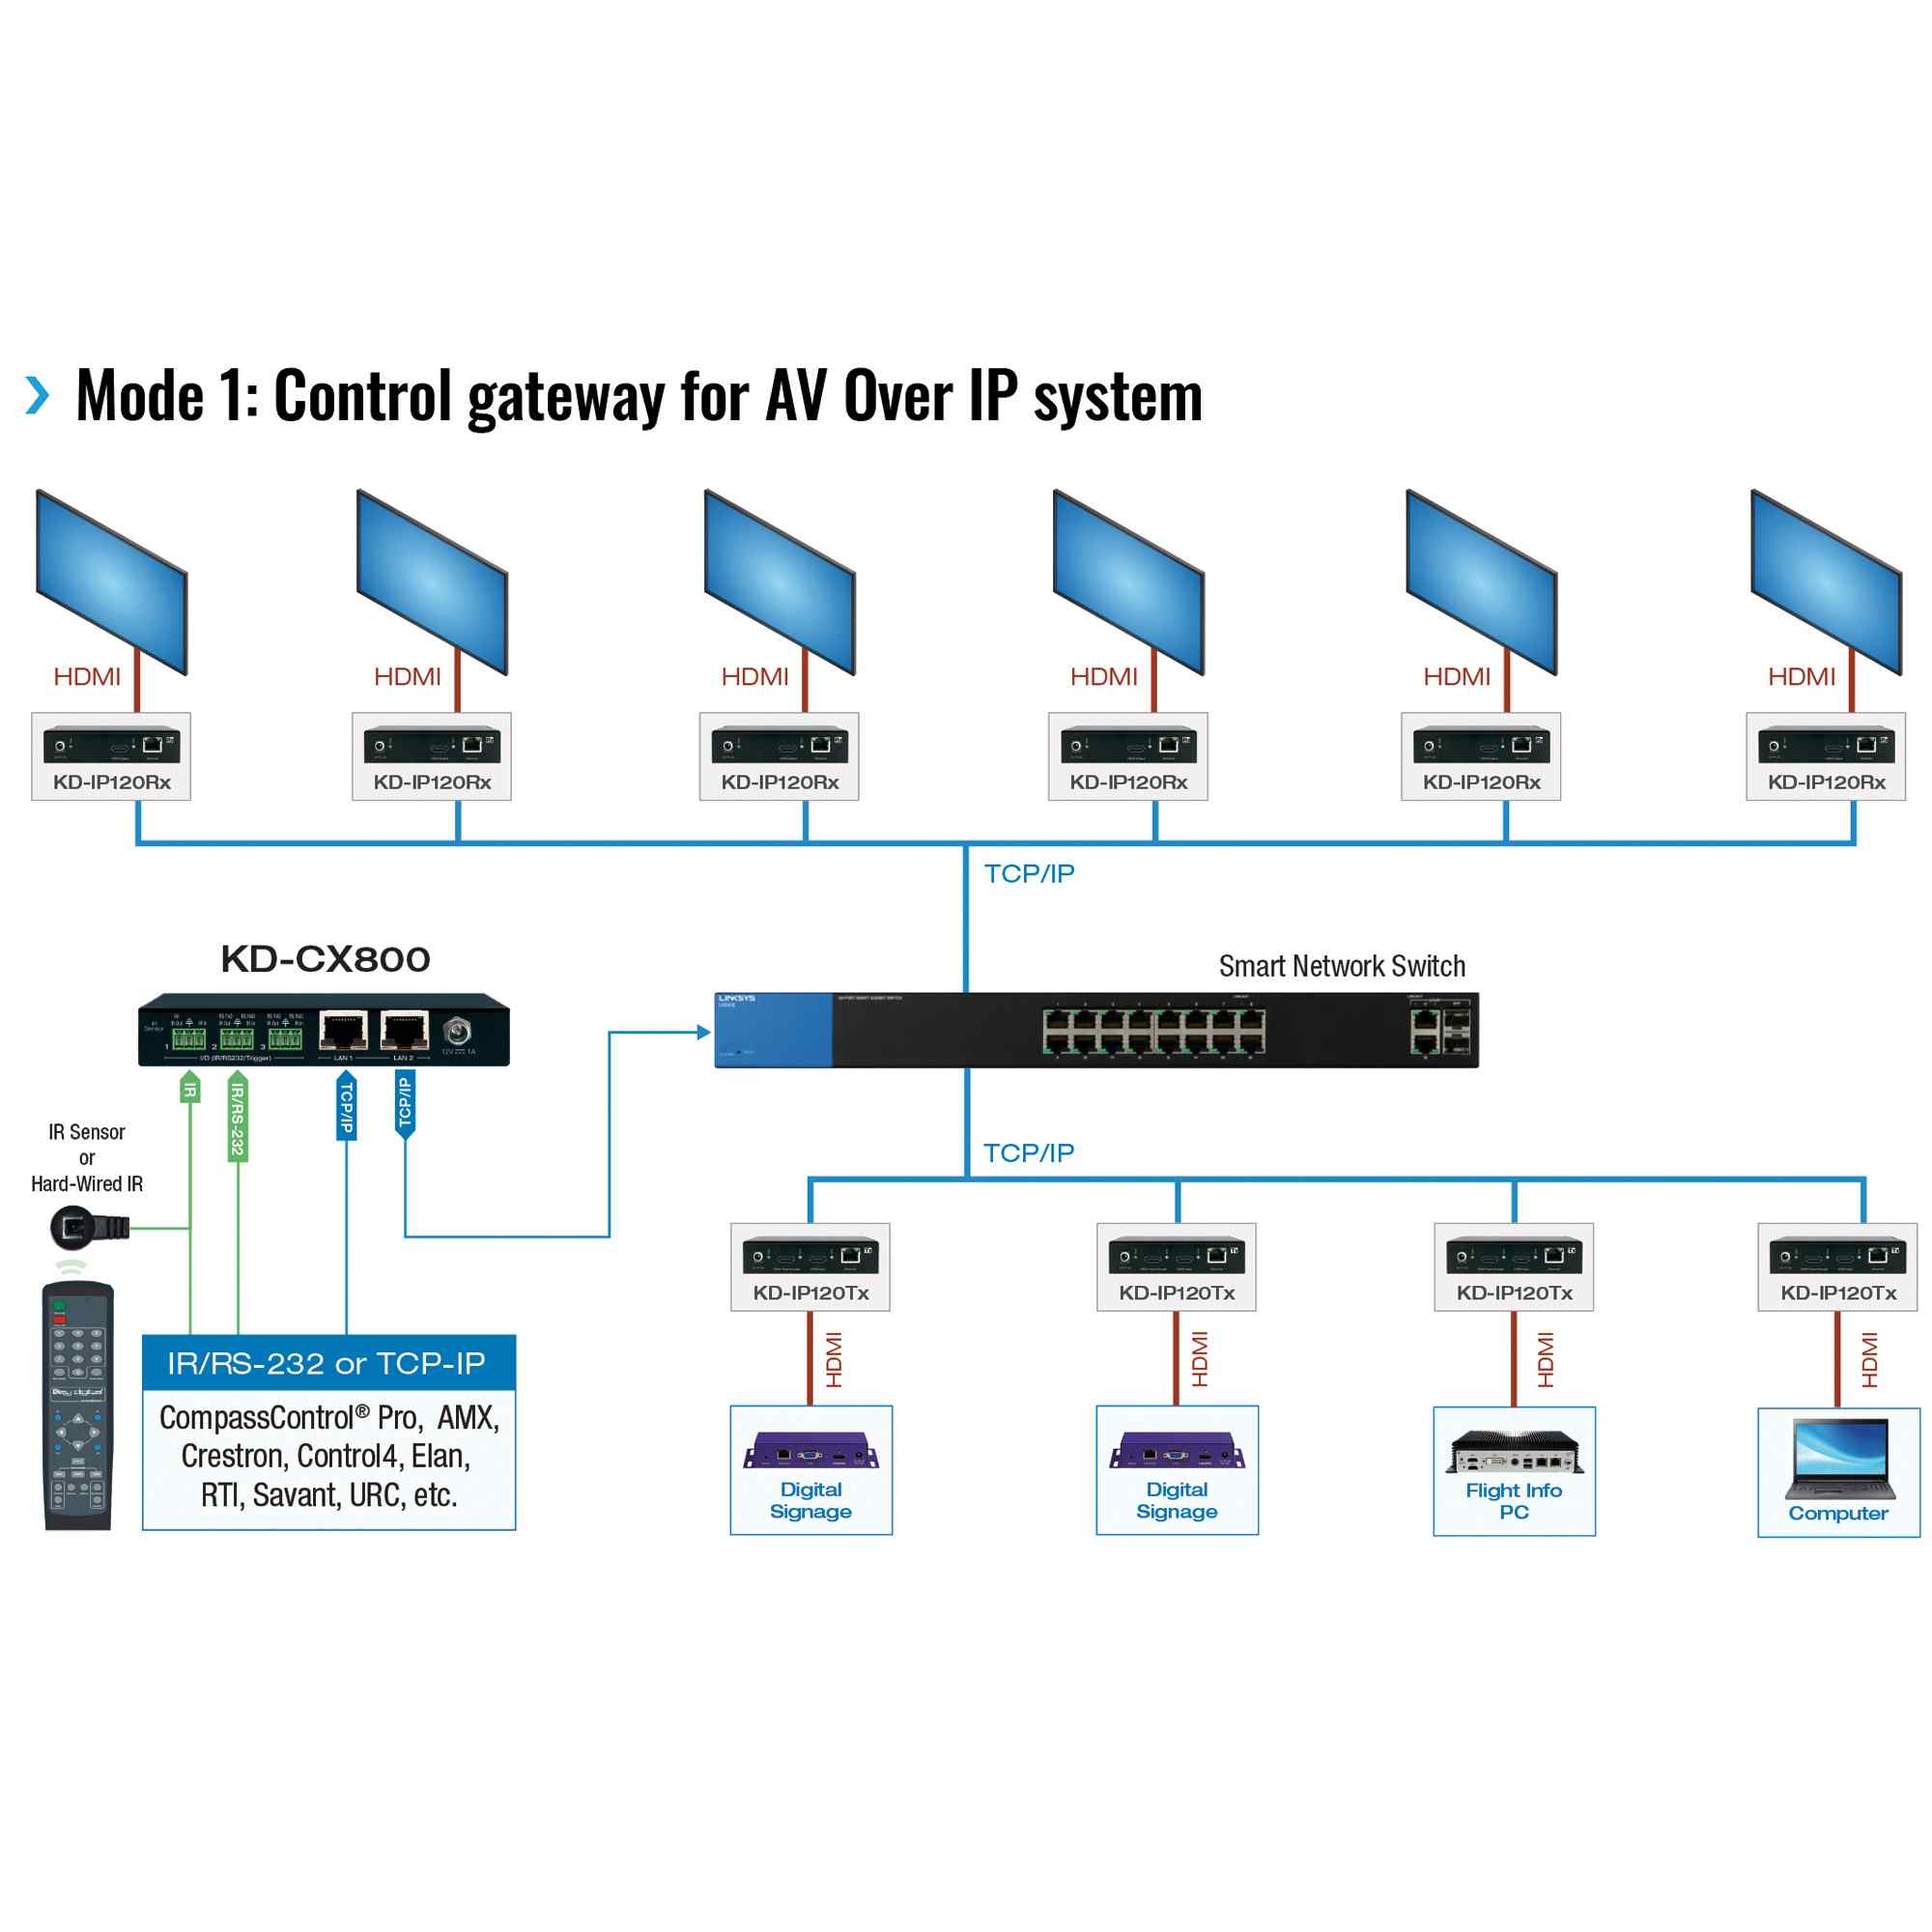 Thumbnail of Example Diagram showing control gateway for AV over IP system